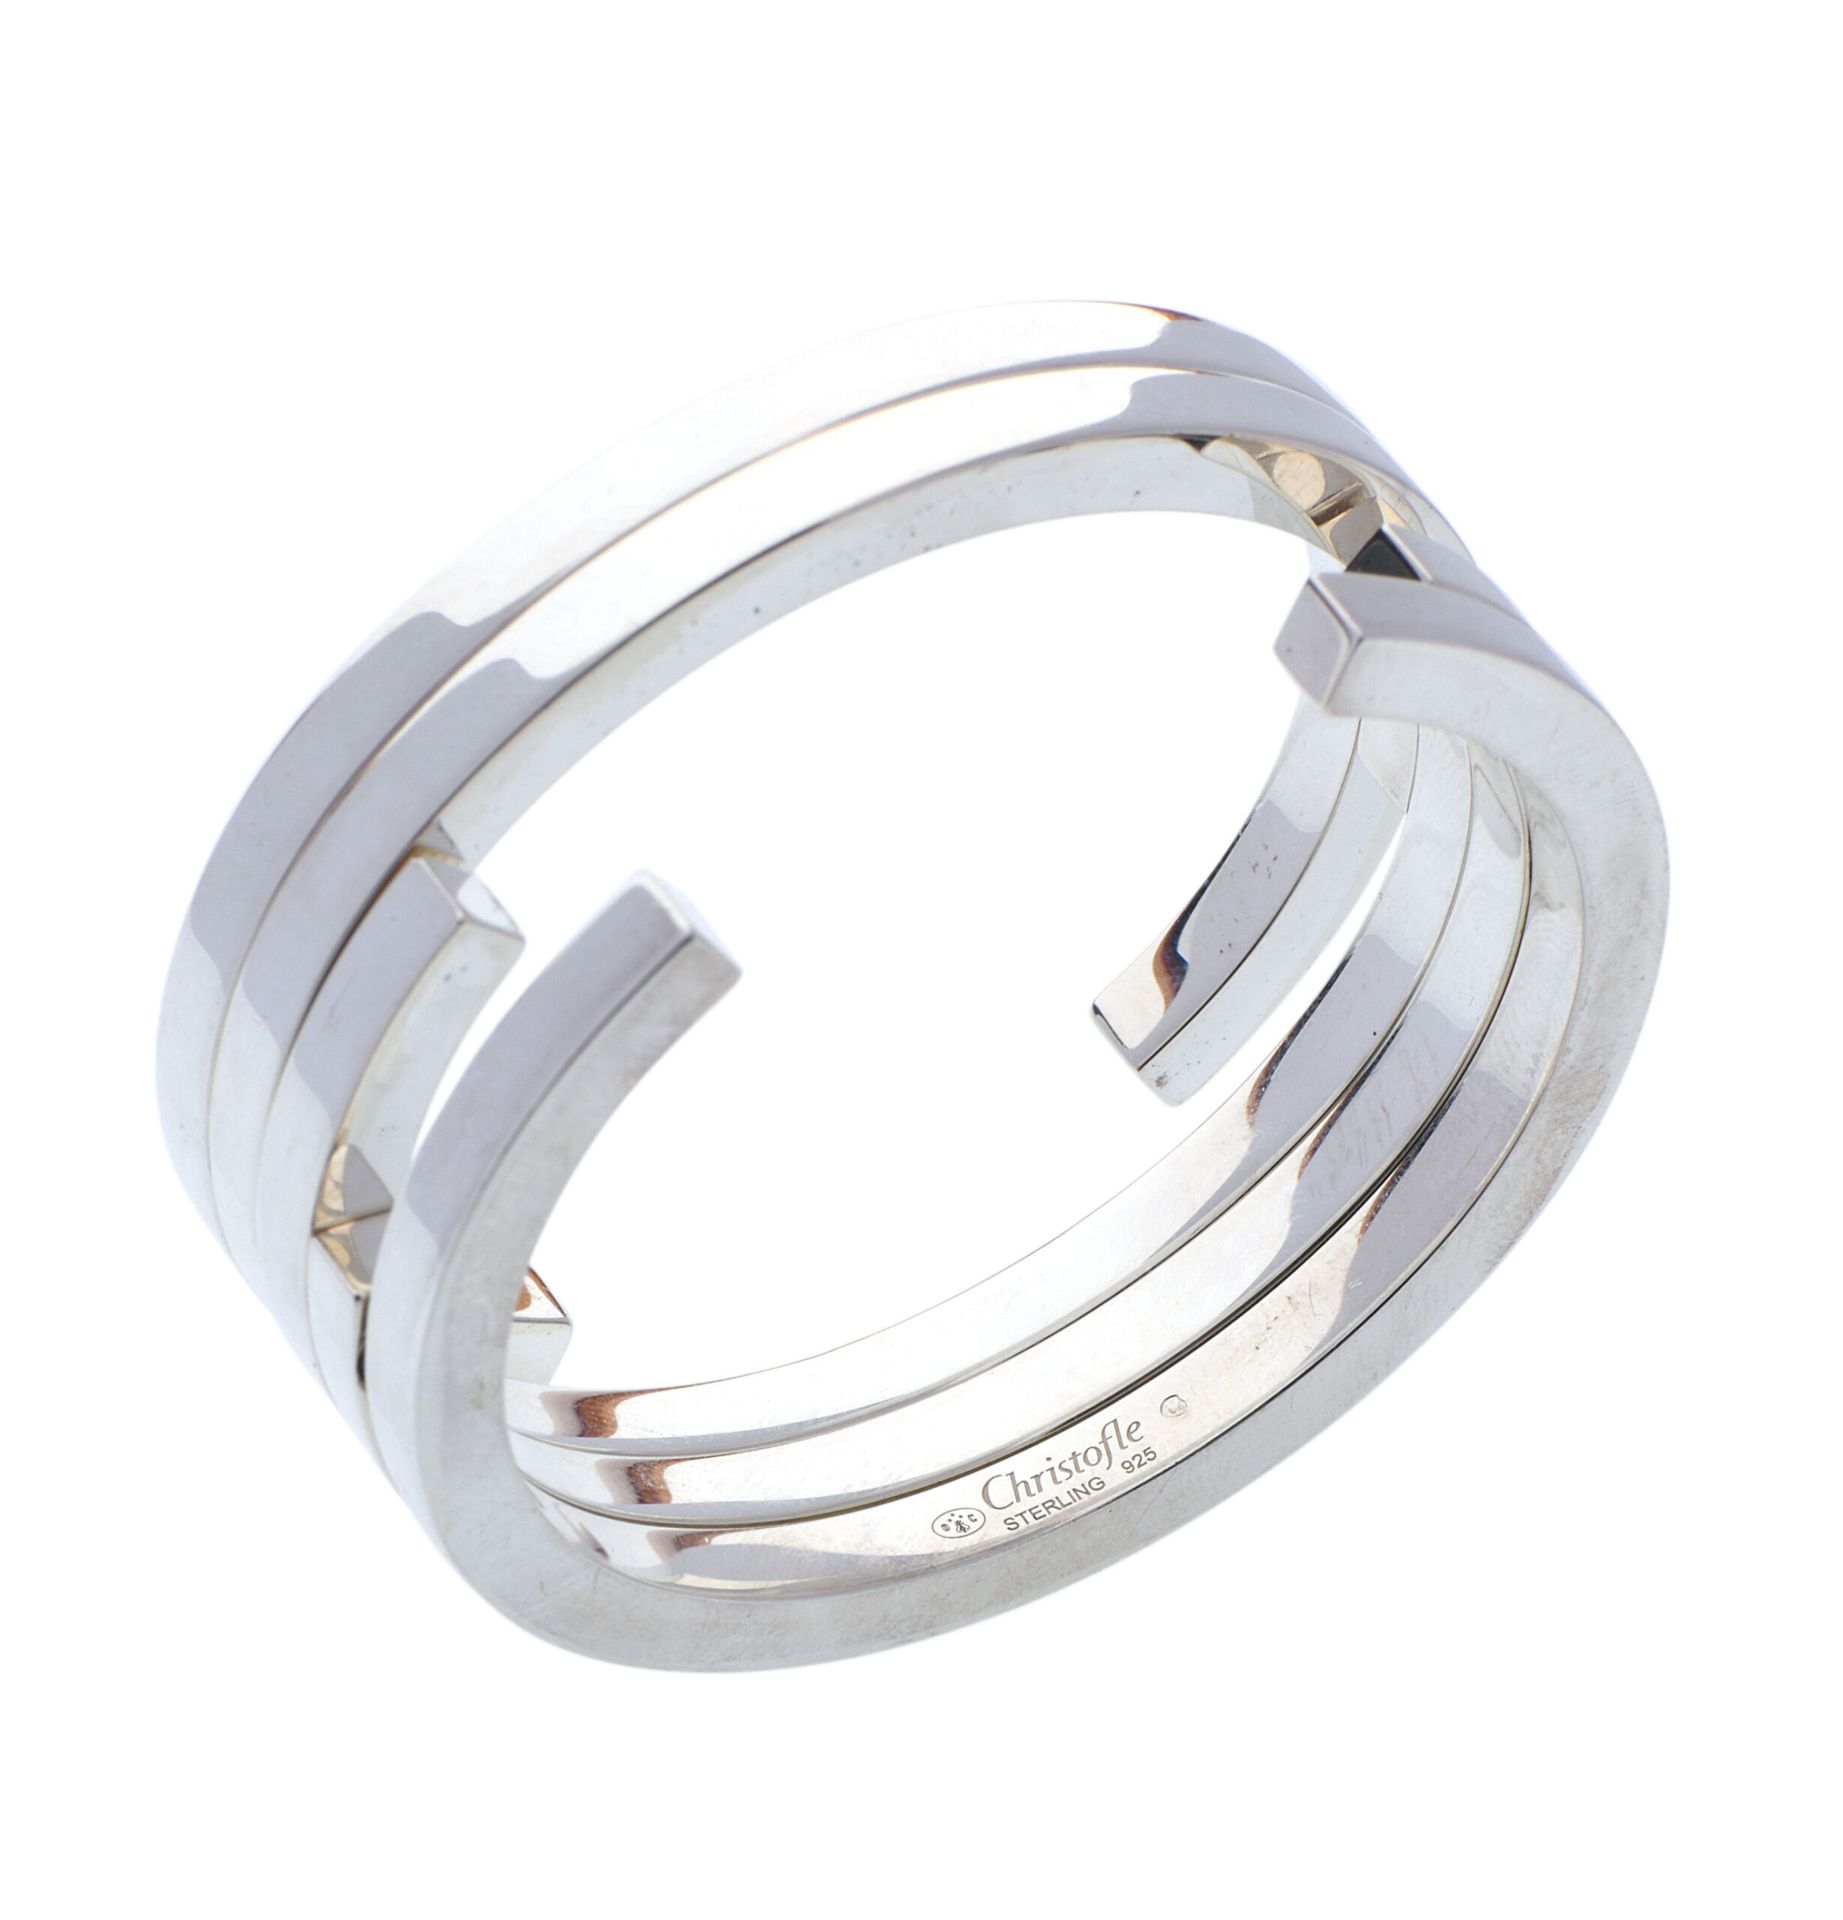 Null CHRISTOFLE ORA ITO - BRACELET in silver 925/°°. D. 6.7 cm. Weight : 164,4 g&hellip;